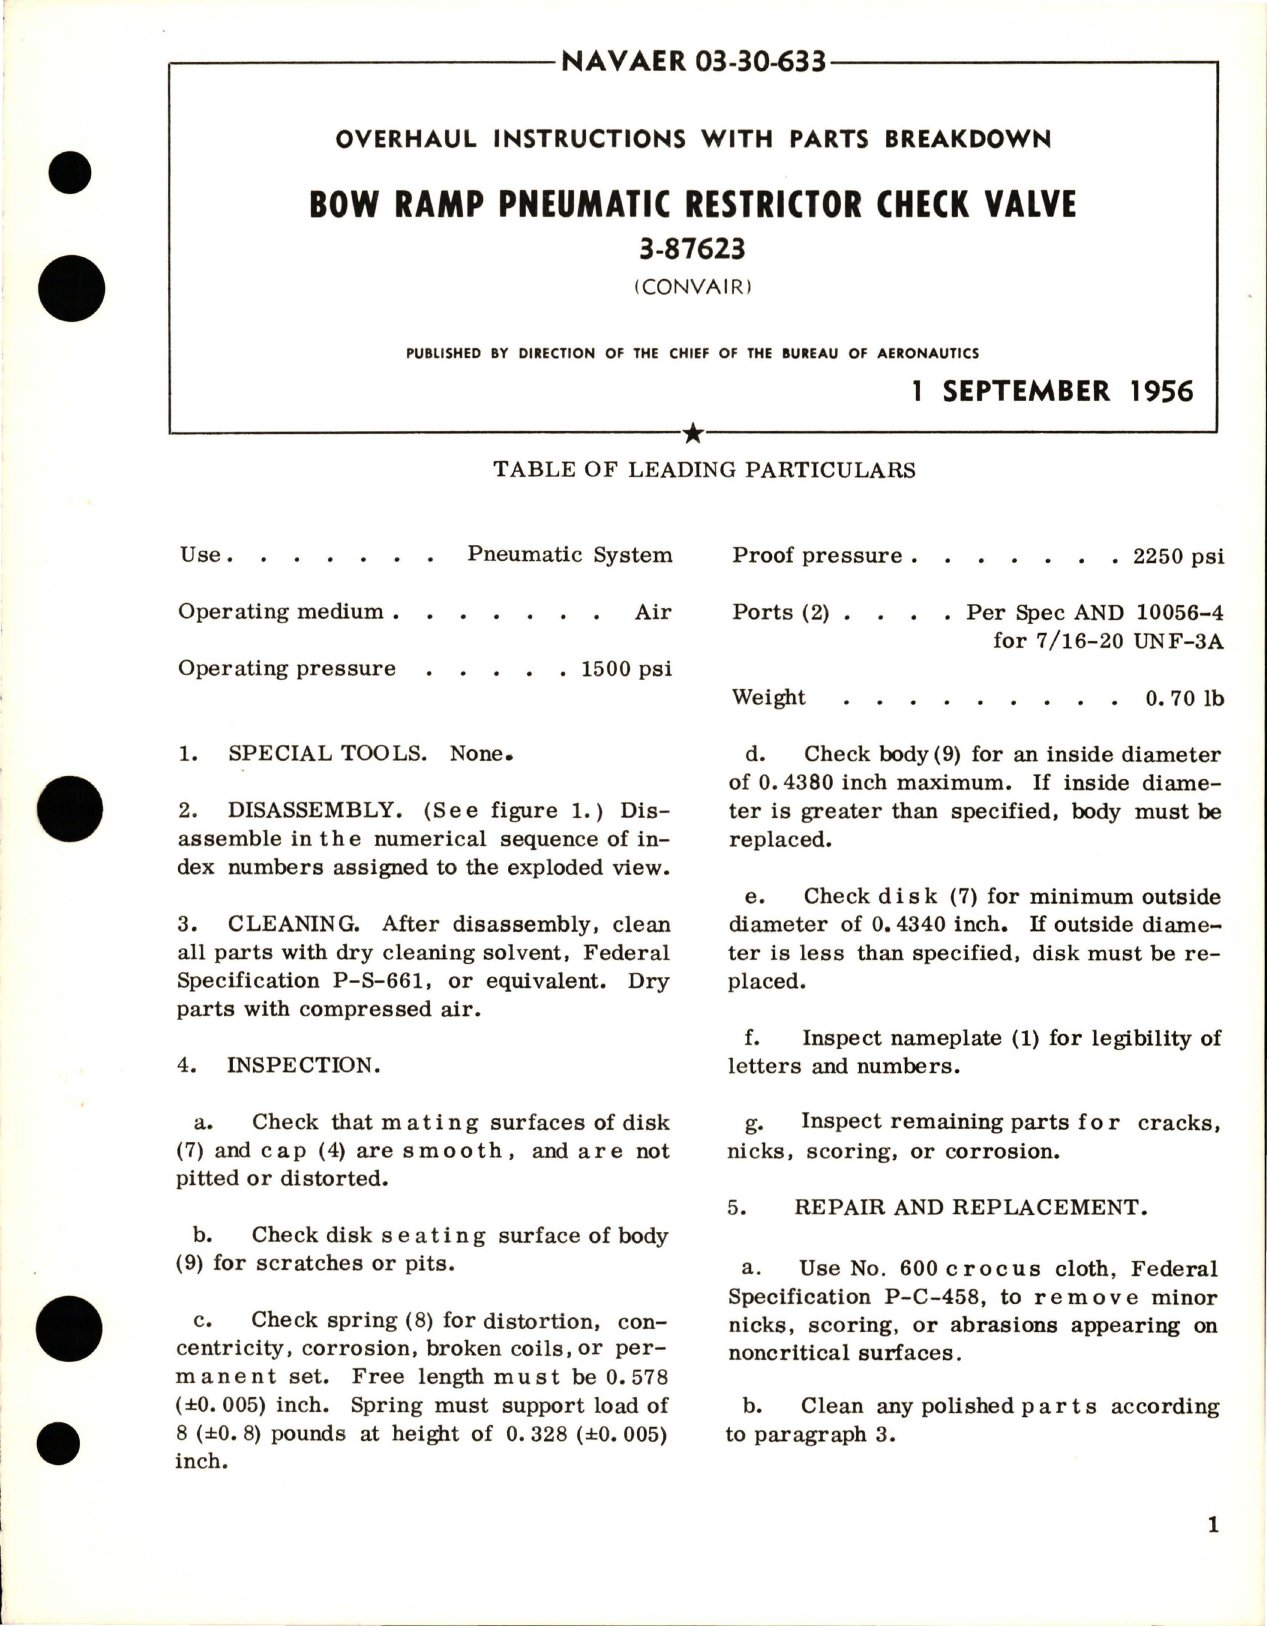 Sample page 1 from AirCorps Library document: Overhaul Instructions with Parts Breakdown for Bow Ramp Pneumatic Restrictor Check Valve - 3-87623